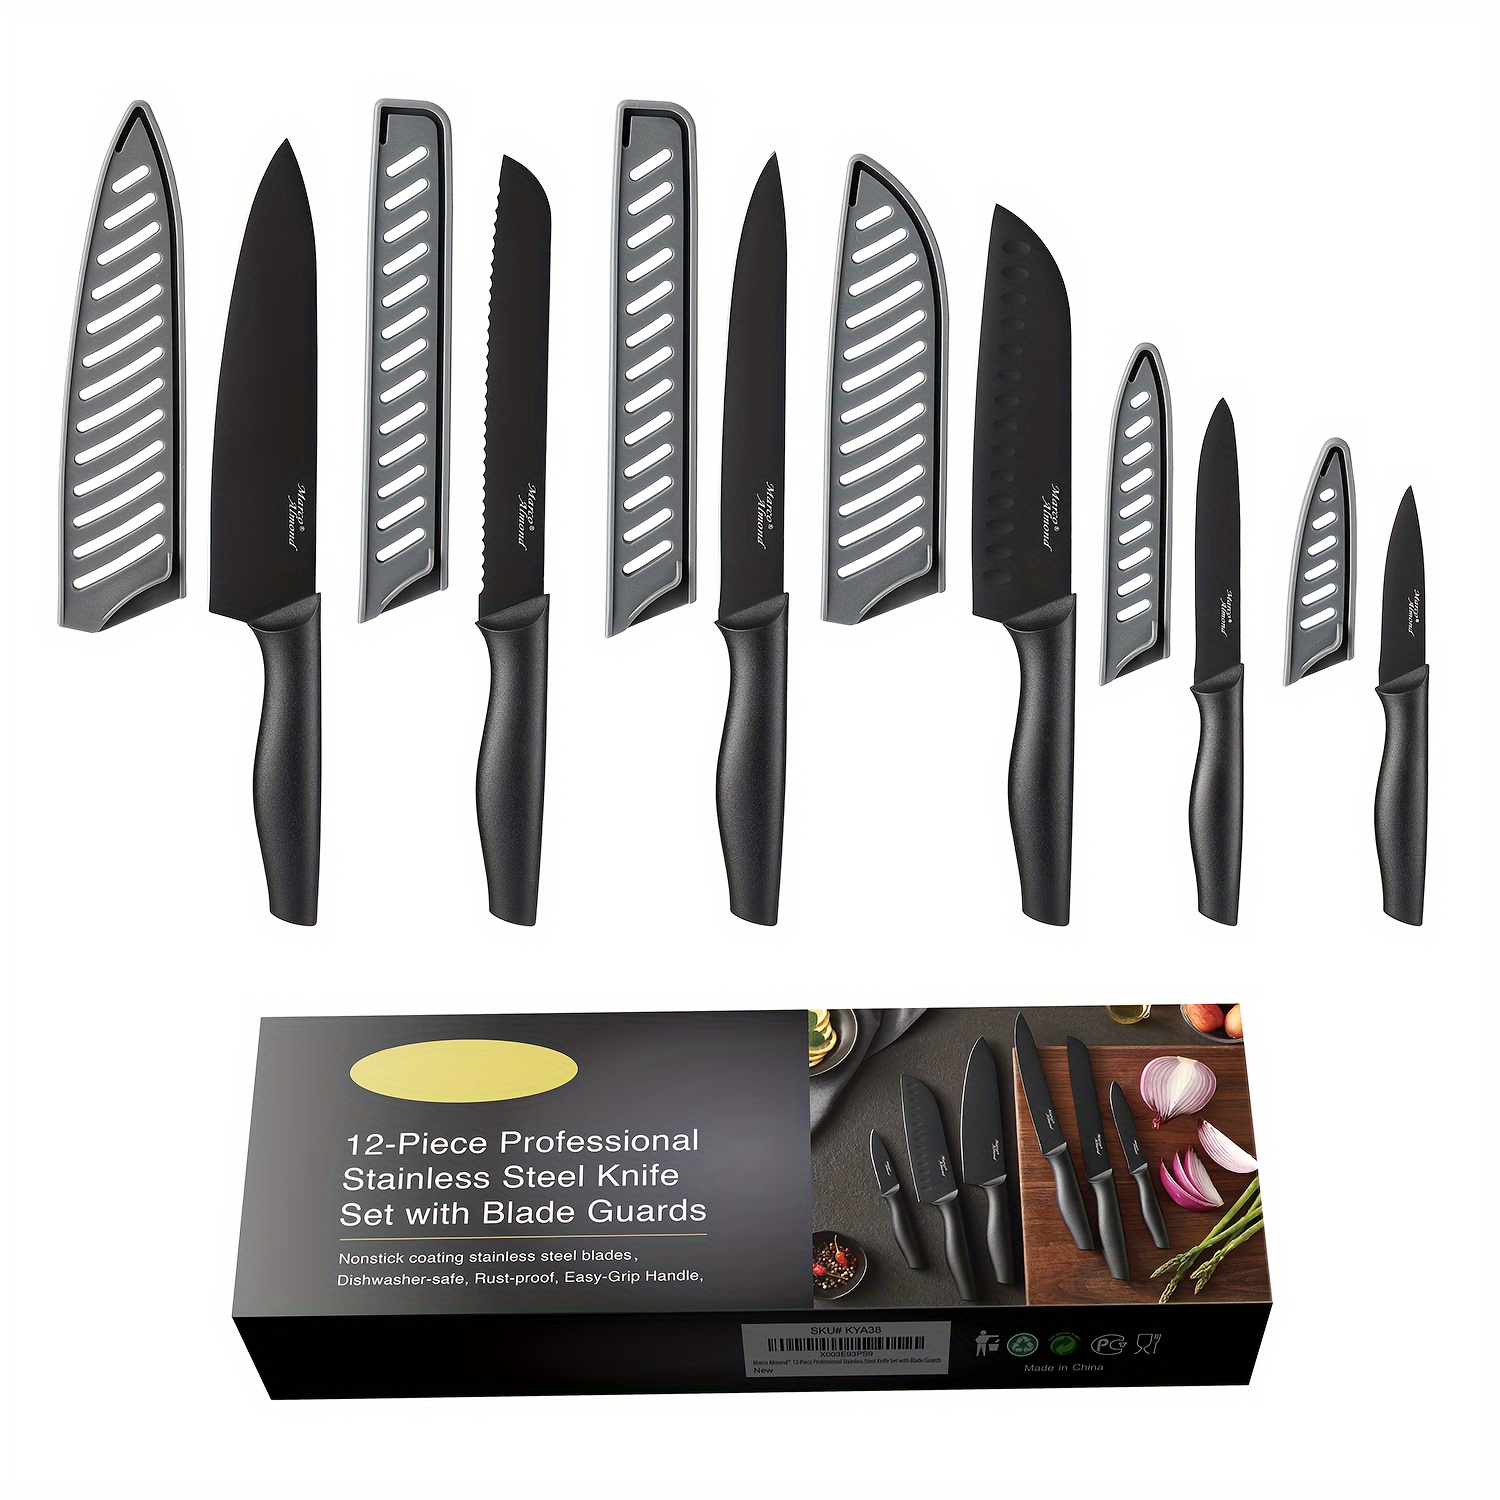 

Mtea38 Non-stick Coated High Carbon Stainless Steel Black Kitchen Knives Set With Sheath, 6 Piece Set, Dishwasher Safe, The Best Gift.